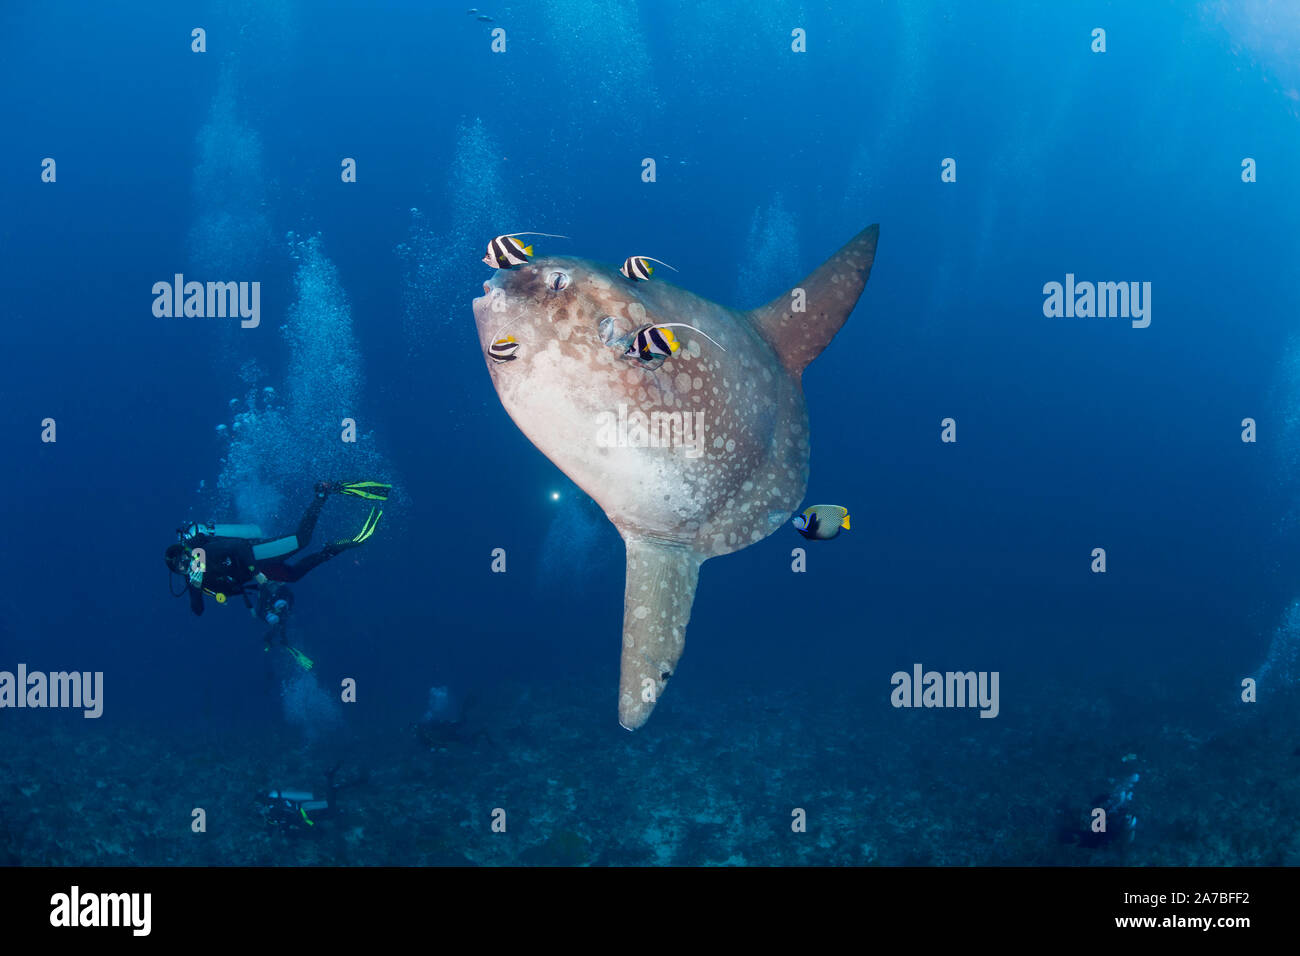 Divers look on as this ocean sunfish, Mola mola, gets cleaned by an angelfish and longfin bannerfish, Crystal Bay, Nusa Penida, Bali Island, Indonesia Stock Photo